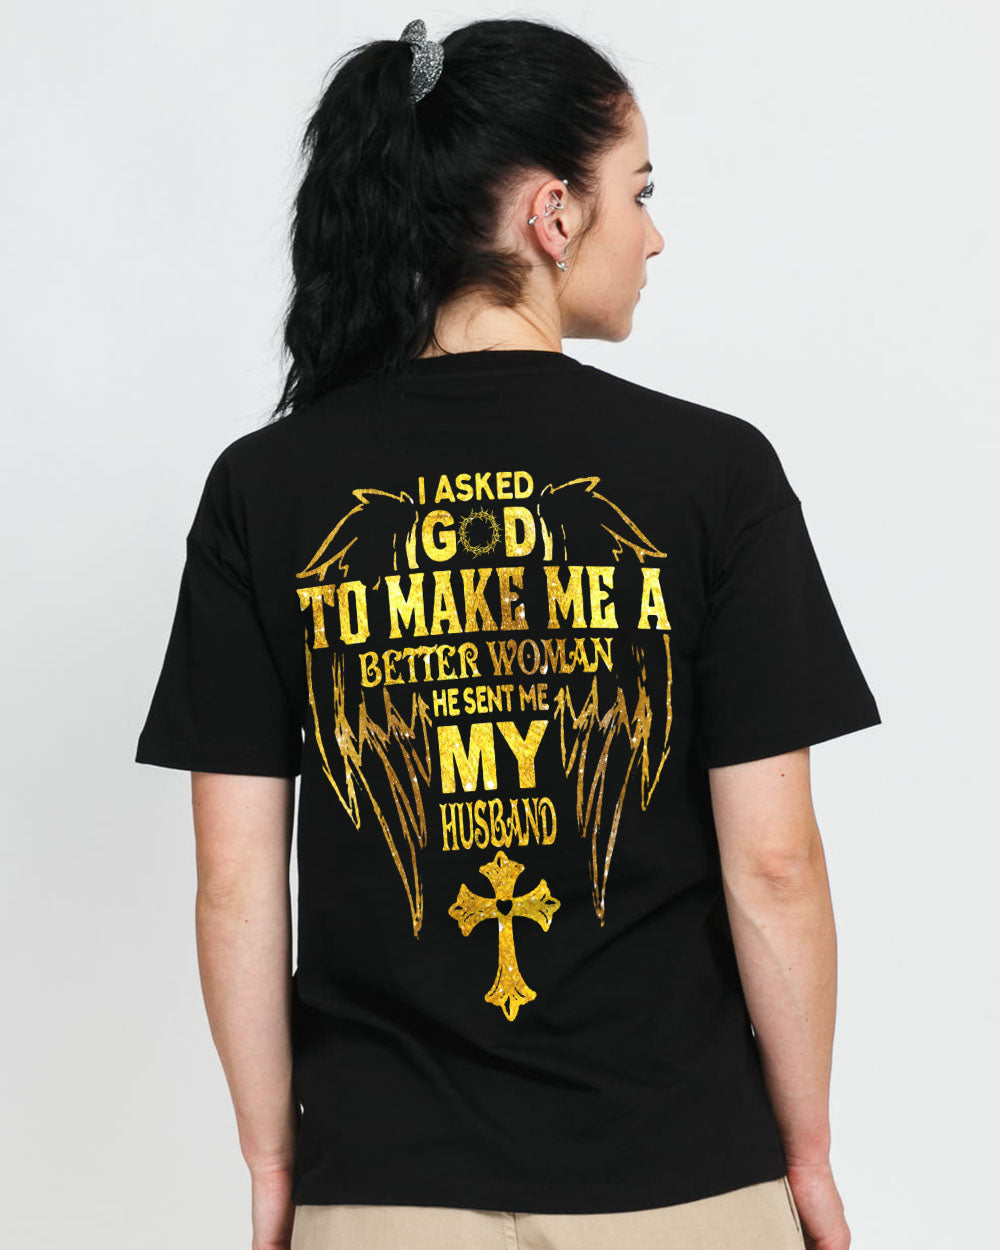 I Asked God To Make Me A Better Woman Women's Christian Tshirt